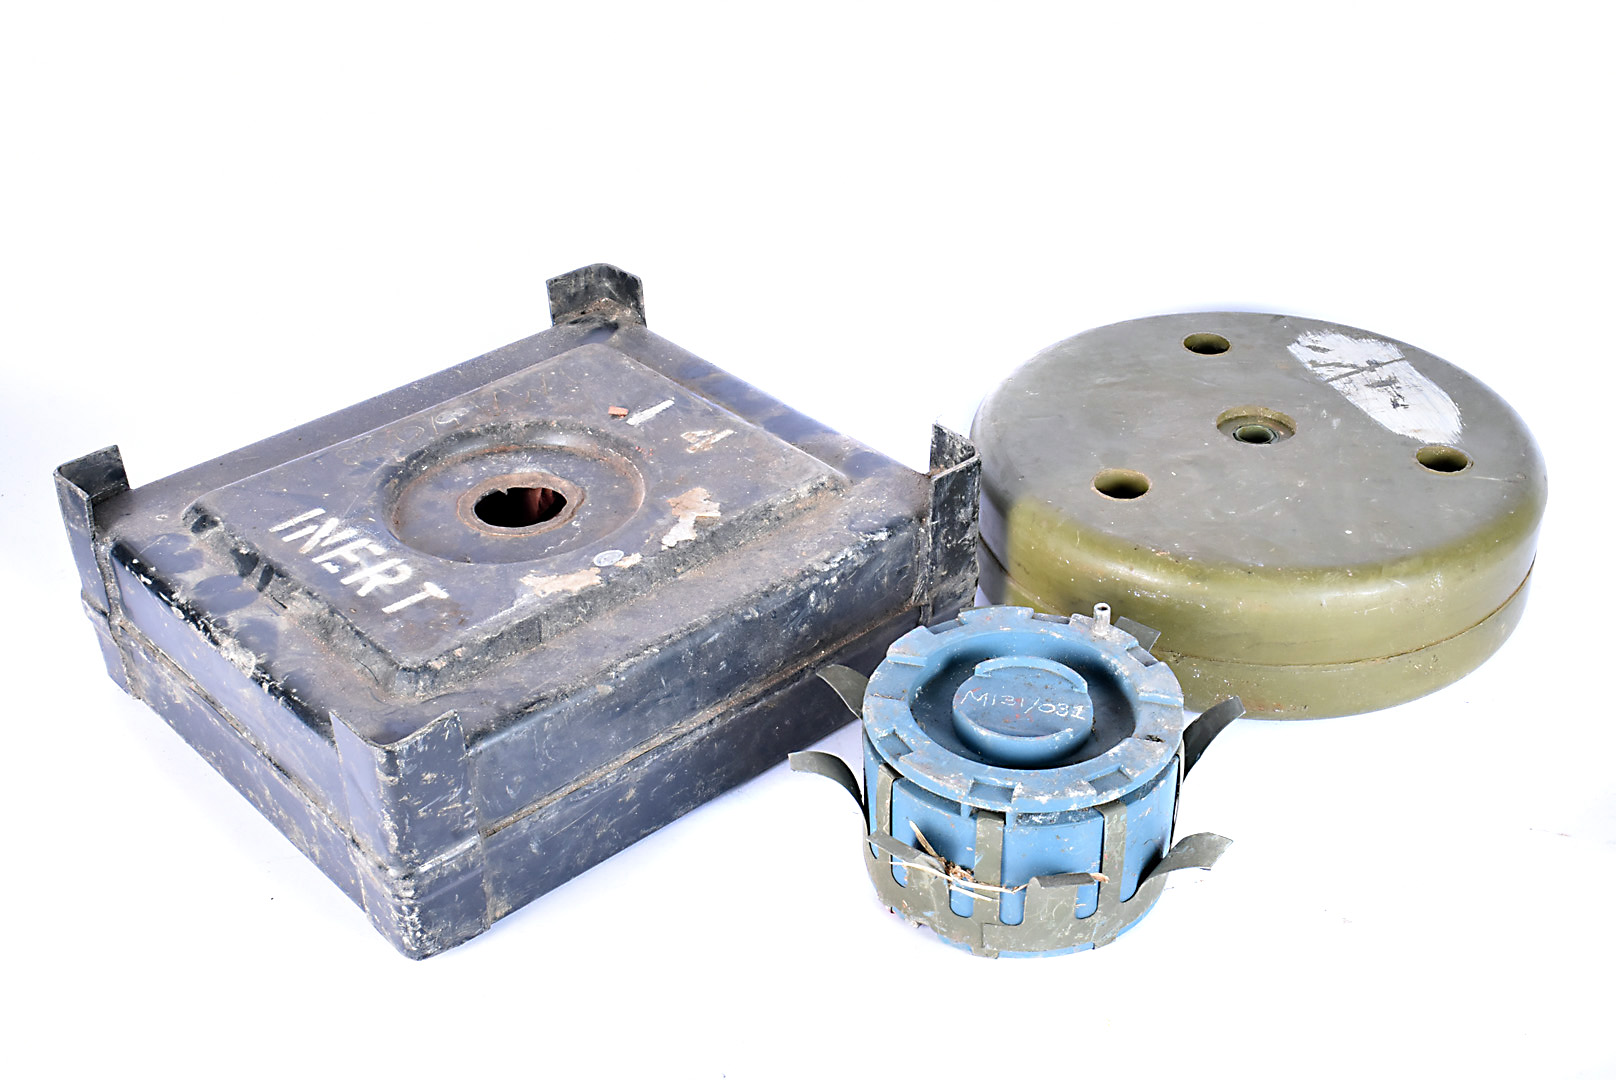 A group of three inert land mines, to include a TMA-5/003 anti-tank mine, a TMA anti-tank mine and a